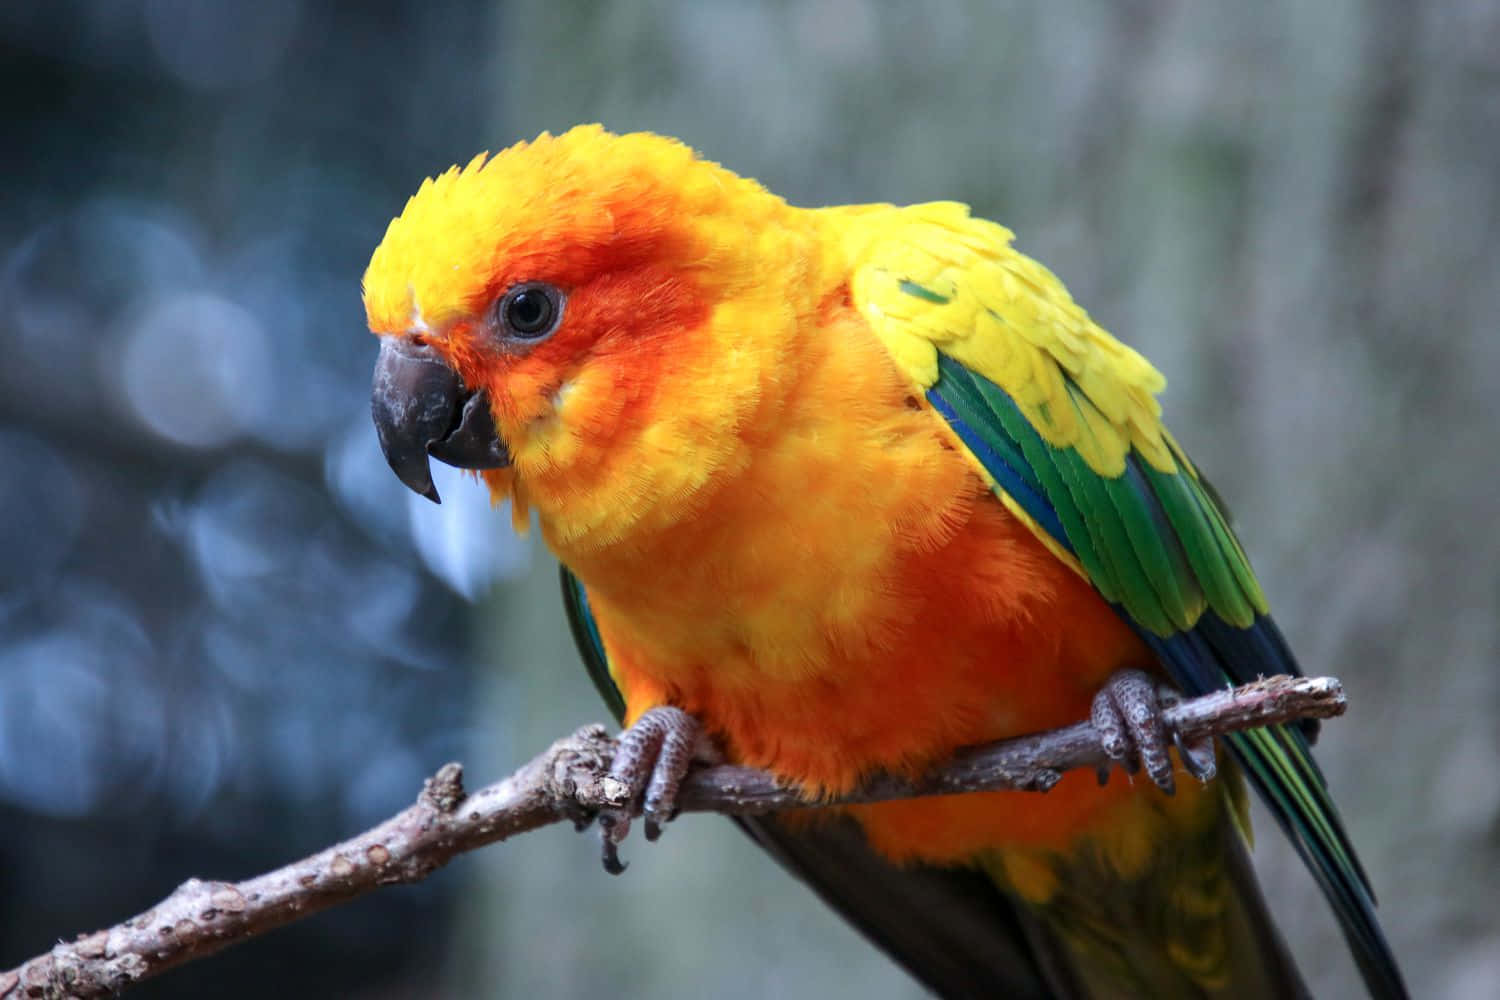 "A Loveable Macaw Parrot Visiting His Home Sweet Home"